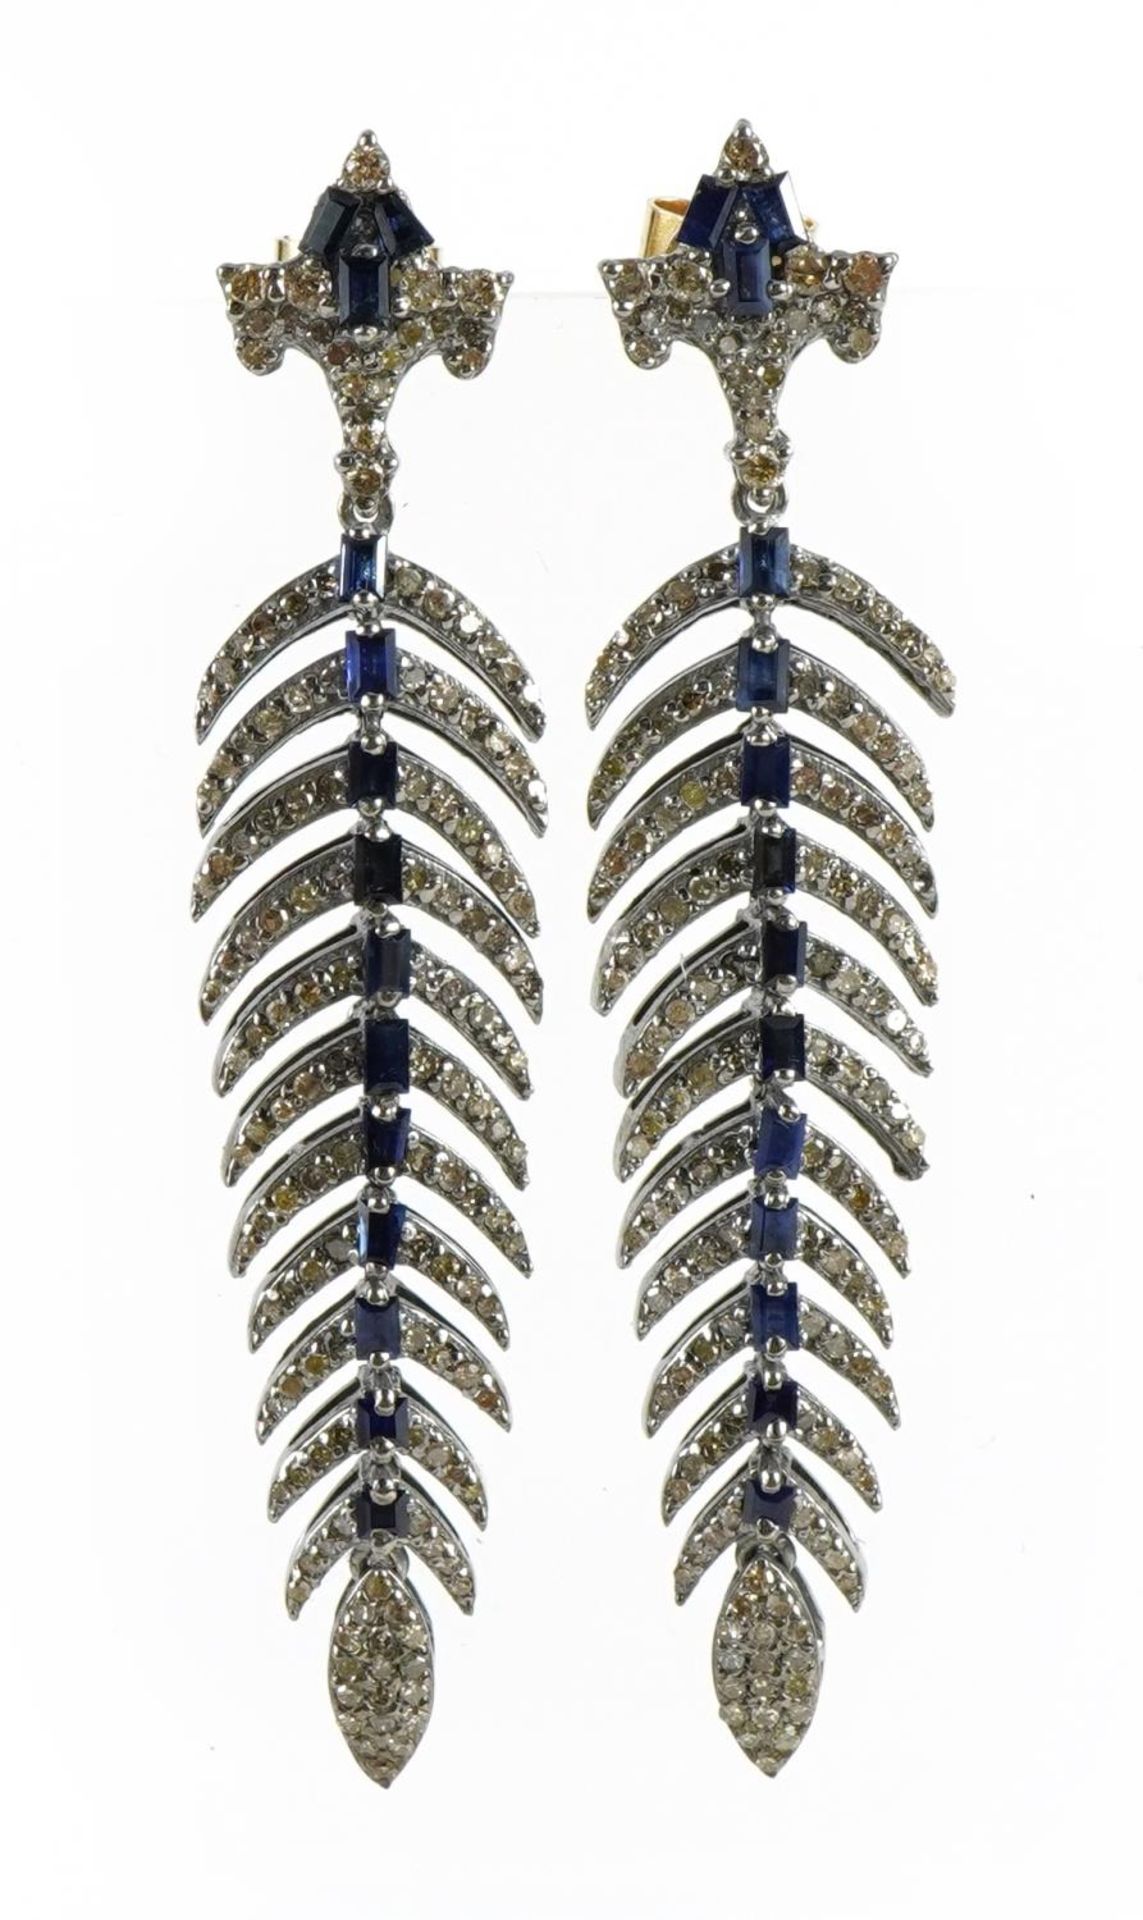 Pair of Art Deco style 14k gold sapphire and diamond drop earrings, 6.5cm high, 16.3g